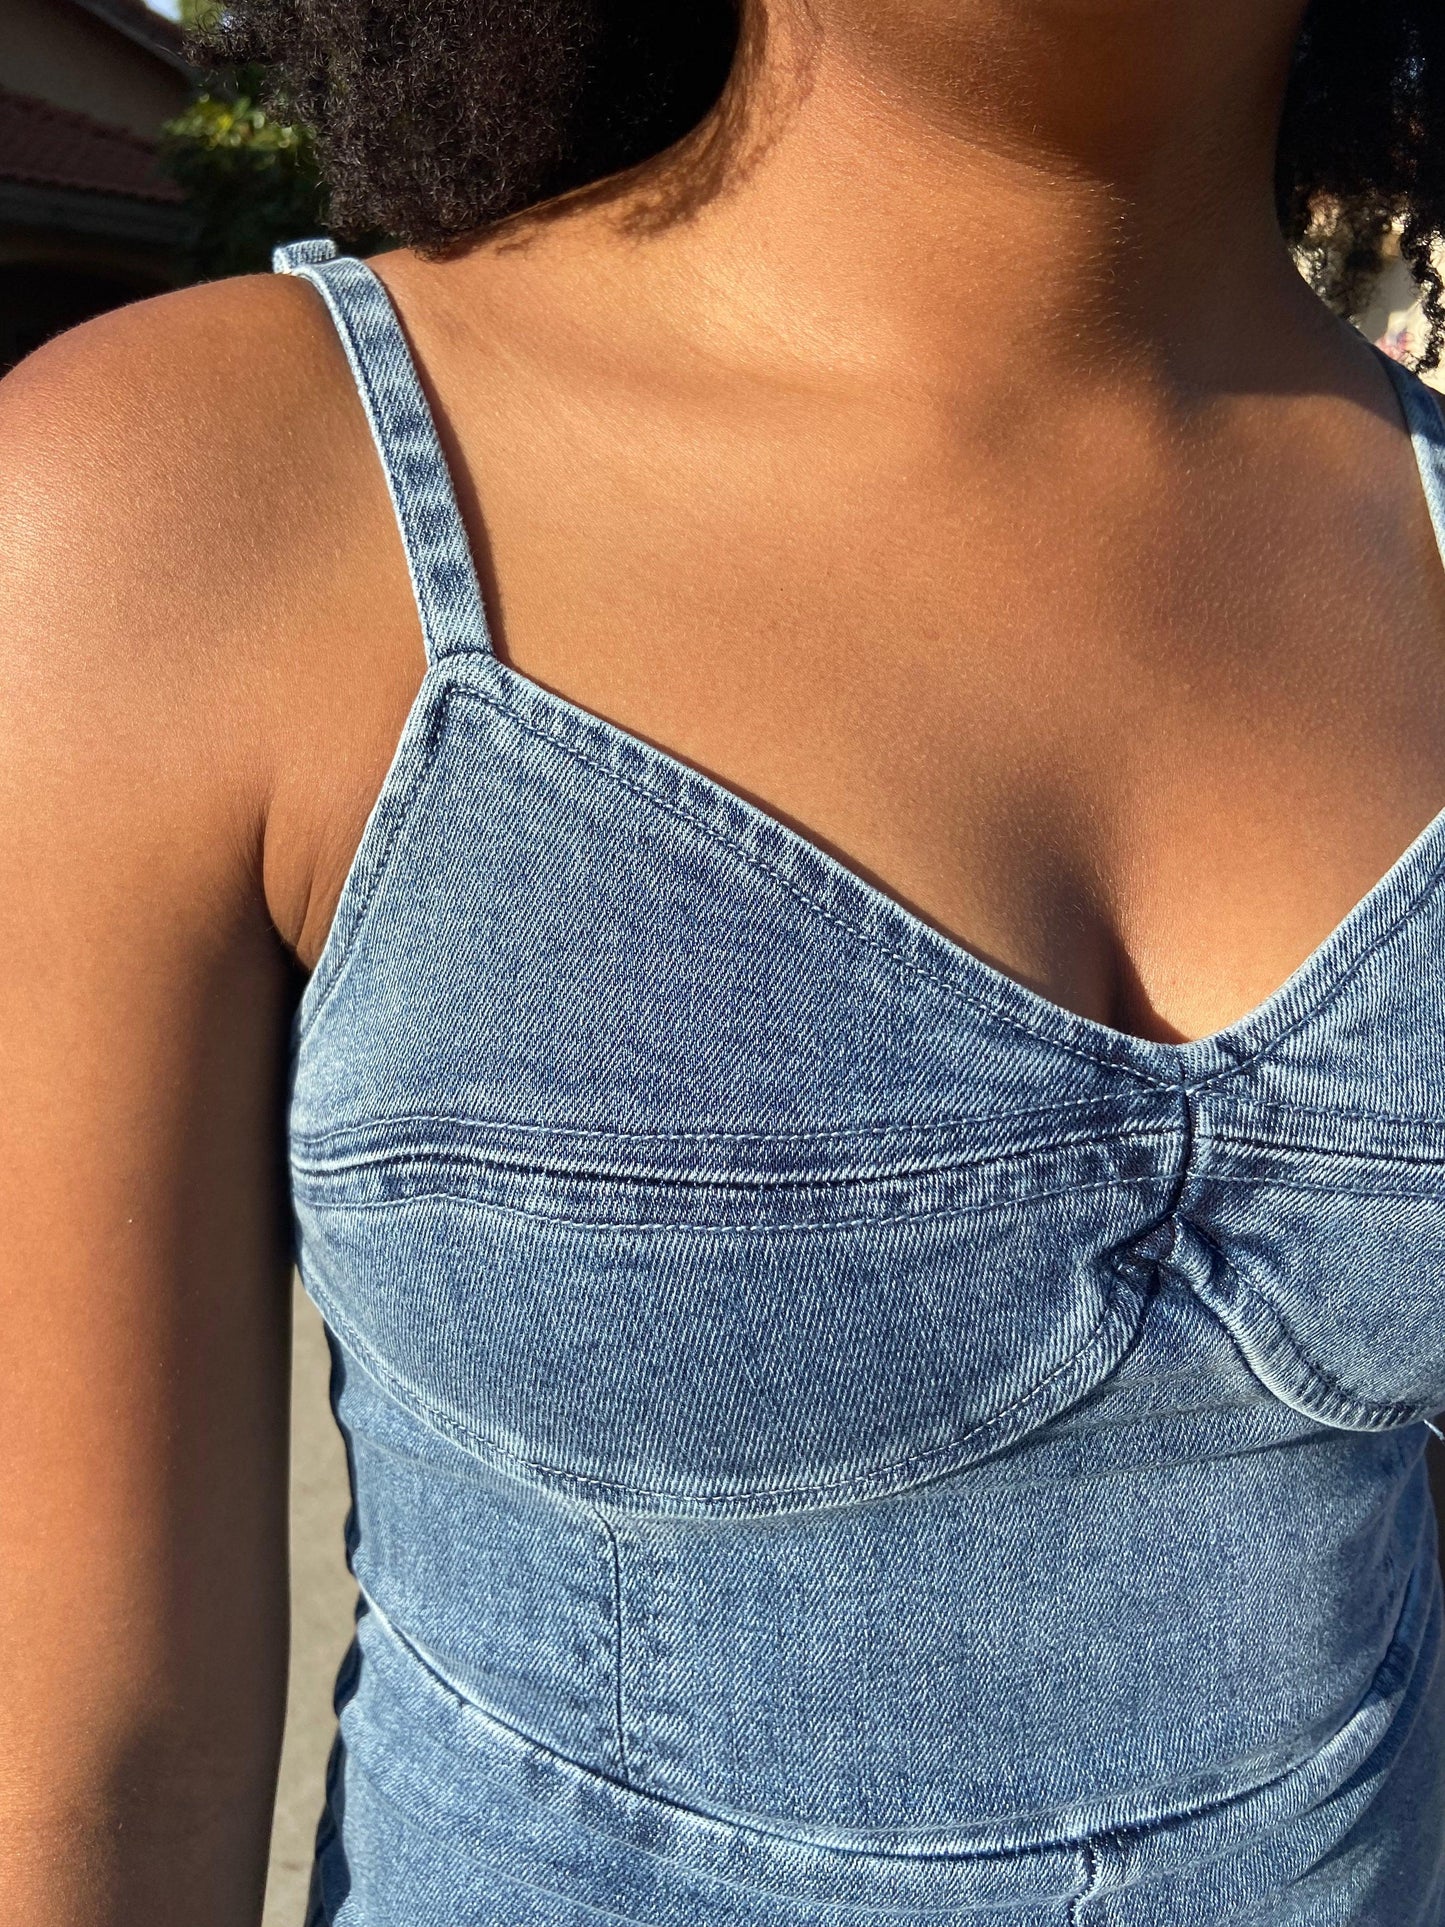 Denim Jumpsuit with Bra-cup Style Top - SavvyLuxe